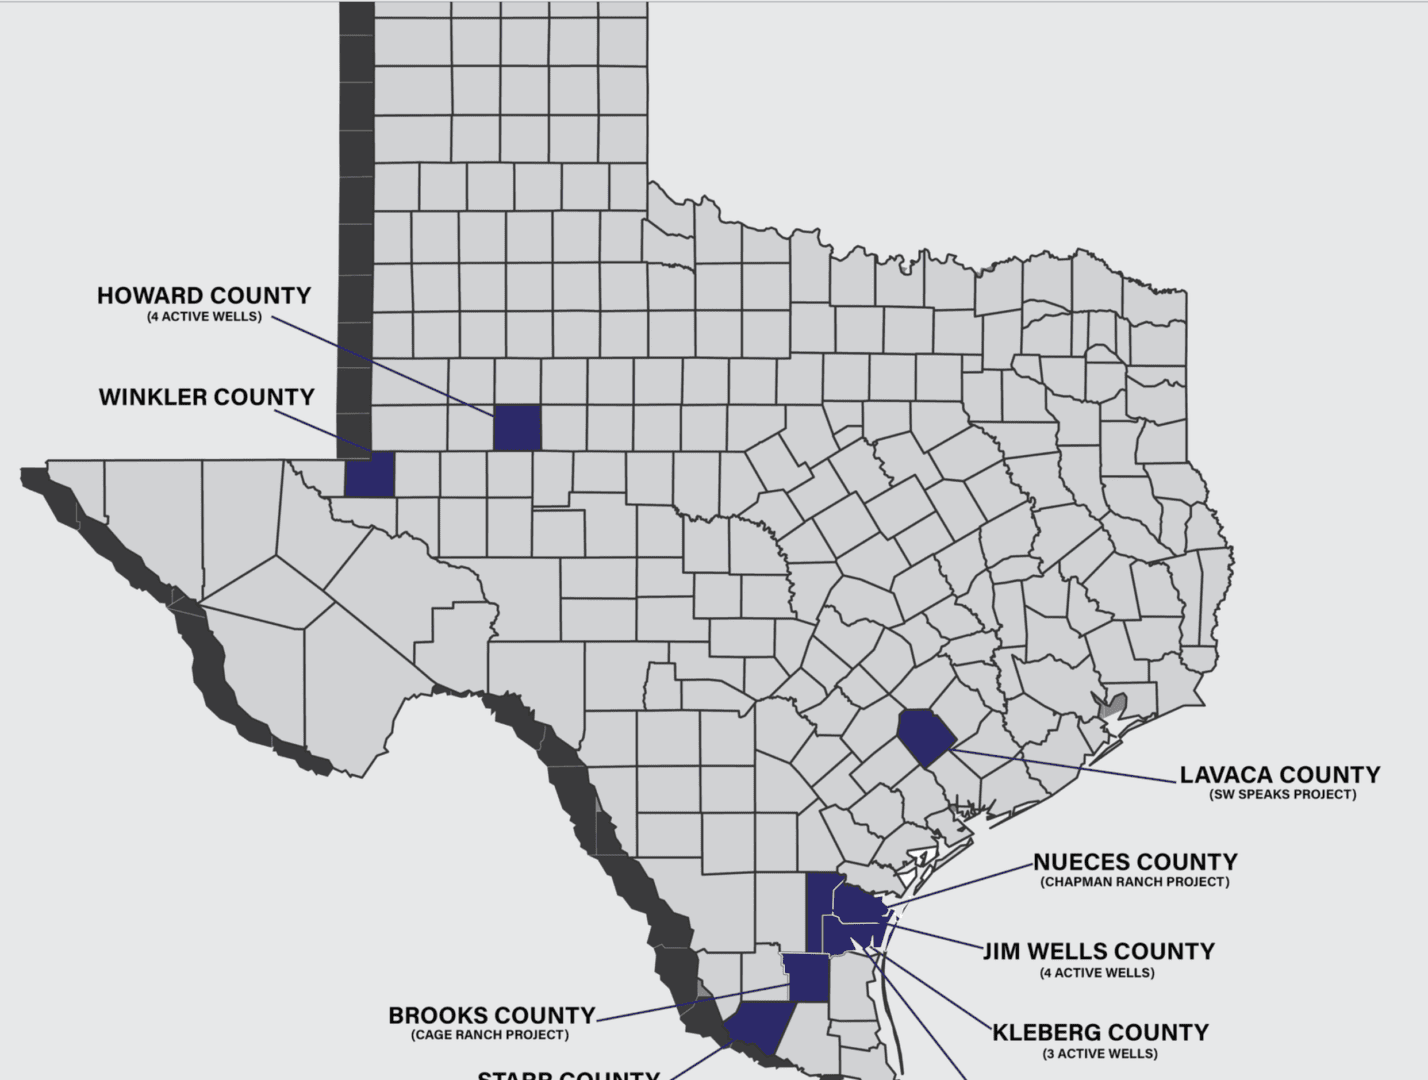 A map of texas with counties marked in blue.